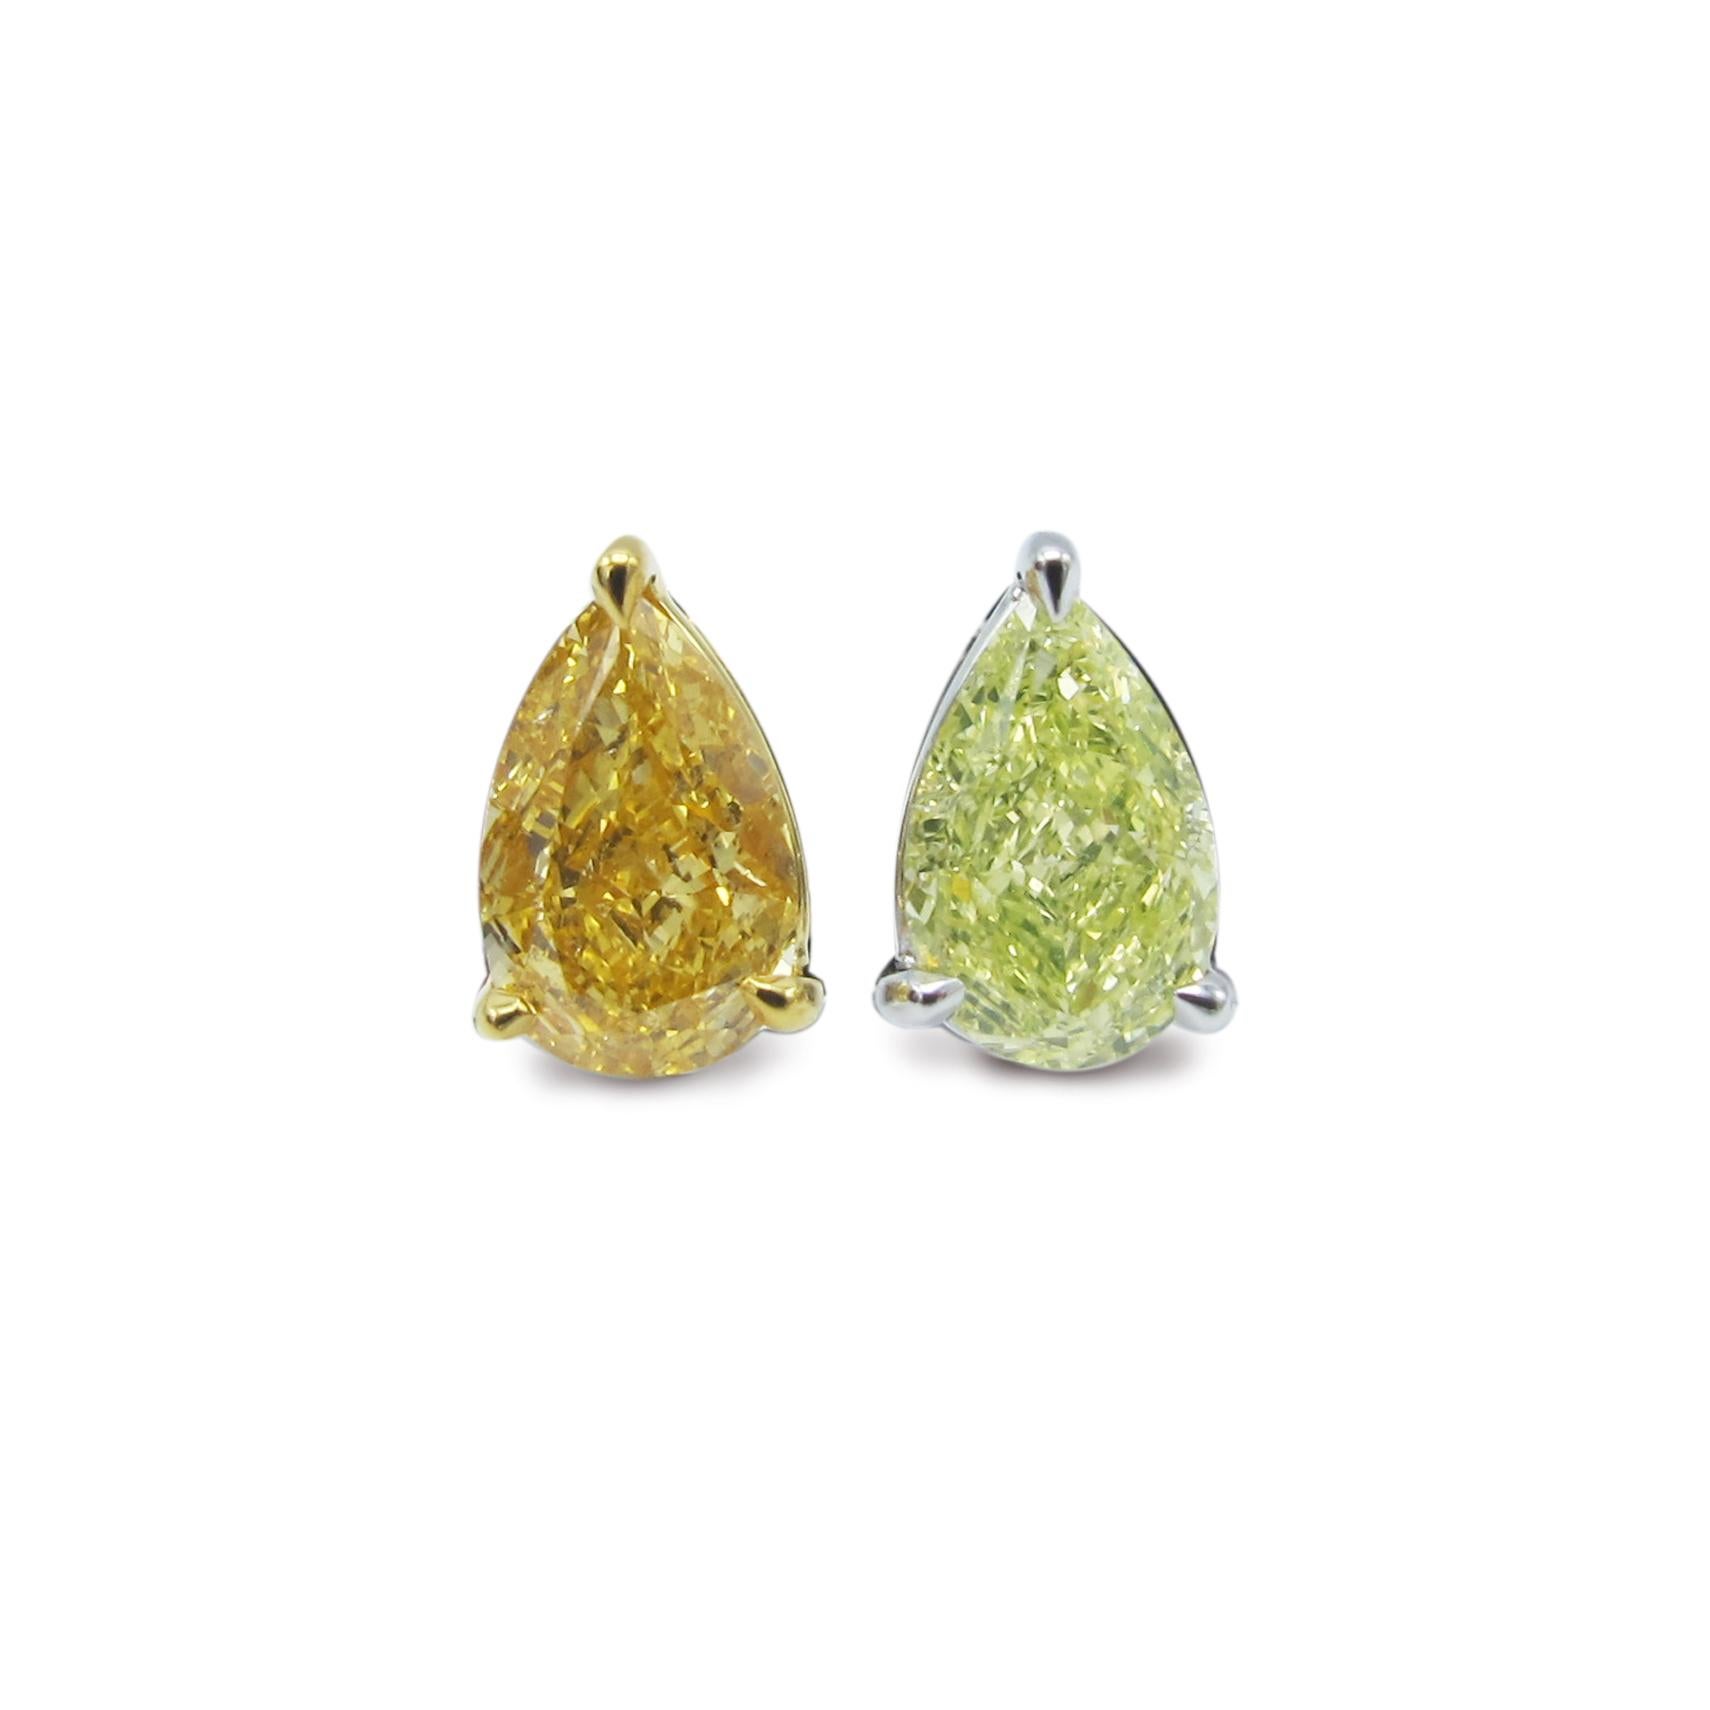 1 Piece Pear Shape Fancy Greenish Yellow VS1 Clarity 1.05 Carats GIA Certified
1 Piece Pear Shape Fancy Intense Orange-Yellow I1 Clarity 1.12 Carats GIA Certified

From The Vault at Emilio Jewelry Located on New York's iconic Fifth Avenue
Please